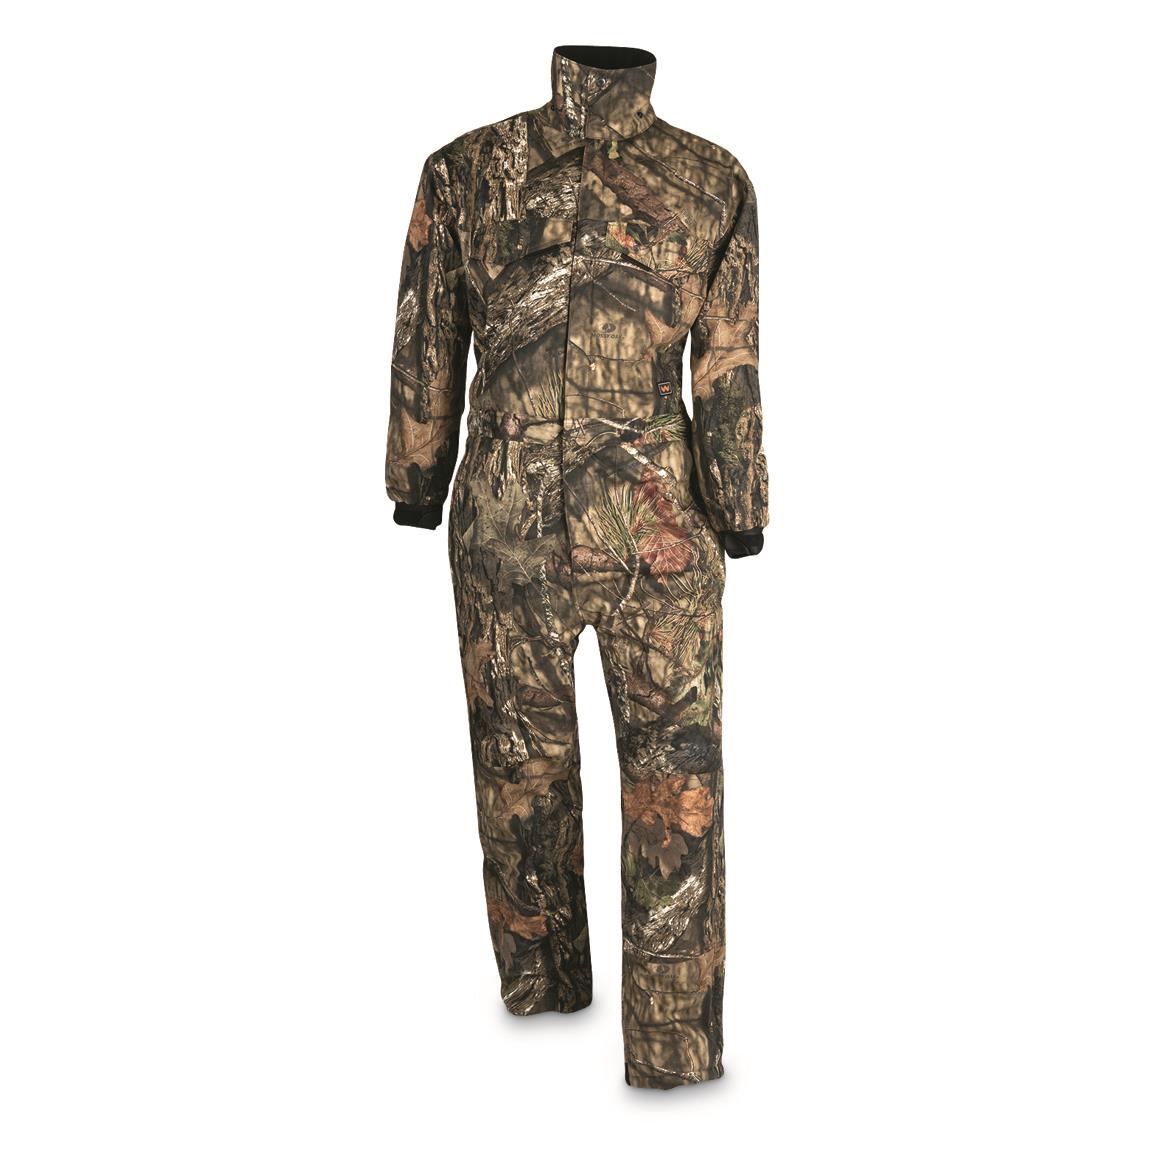 Walls Men's Insulated Hunting Coveralls, Mossy Oak Break-Up® COUNTRY™